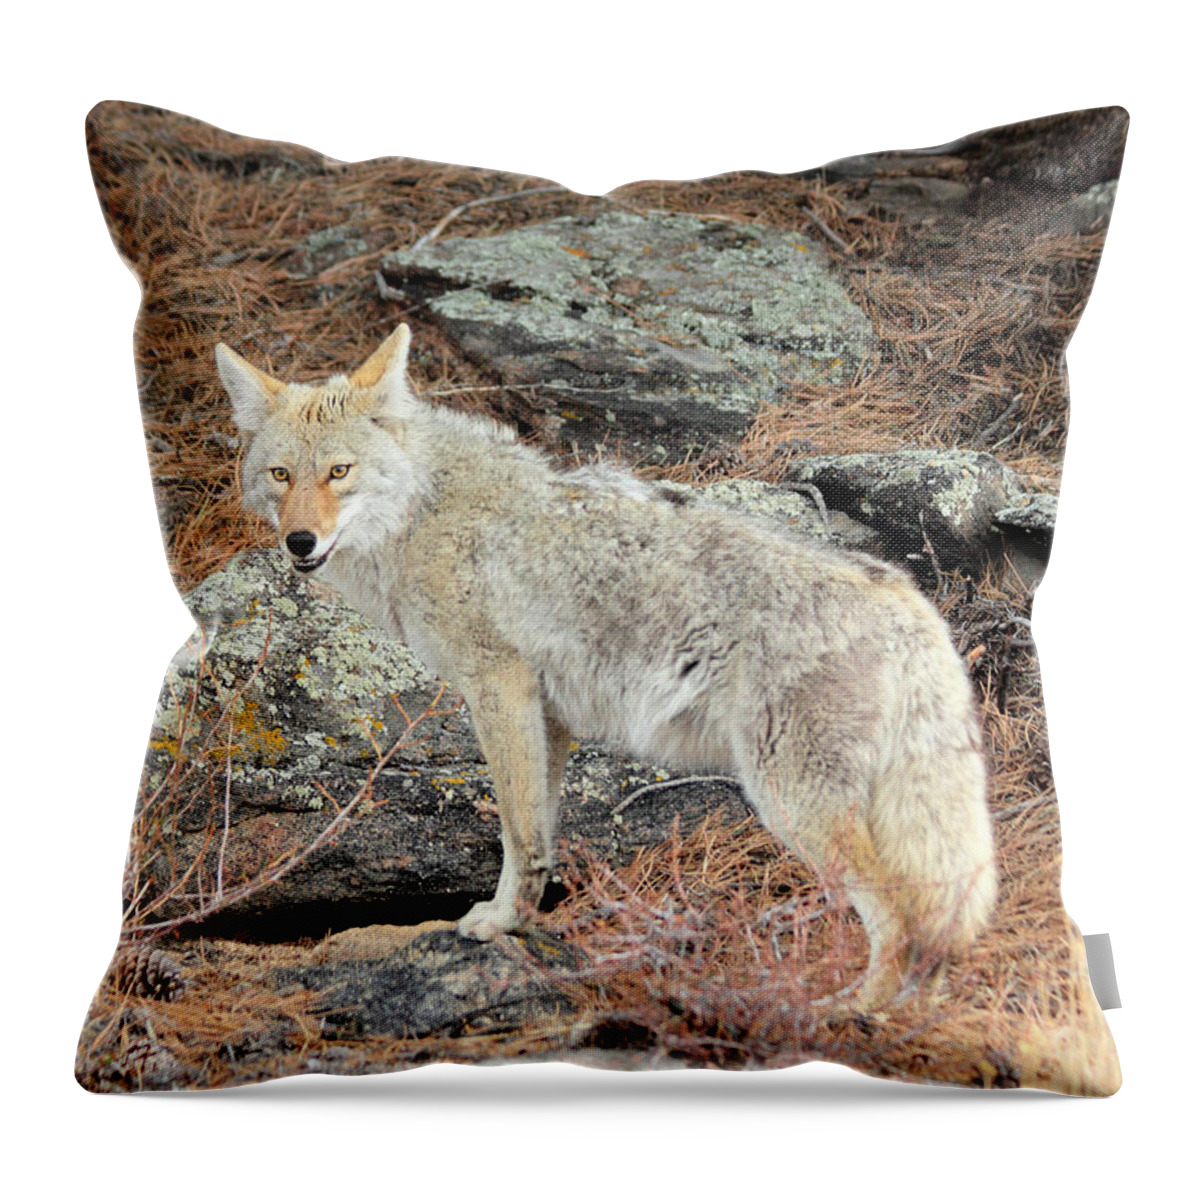 Coyote Throw Pillow featuring the photograph On The Prowl by Shane Bechler